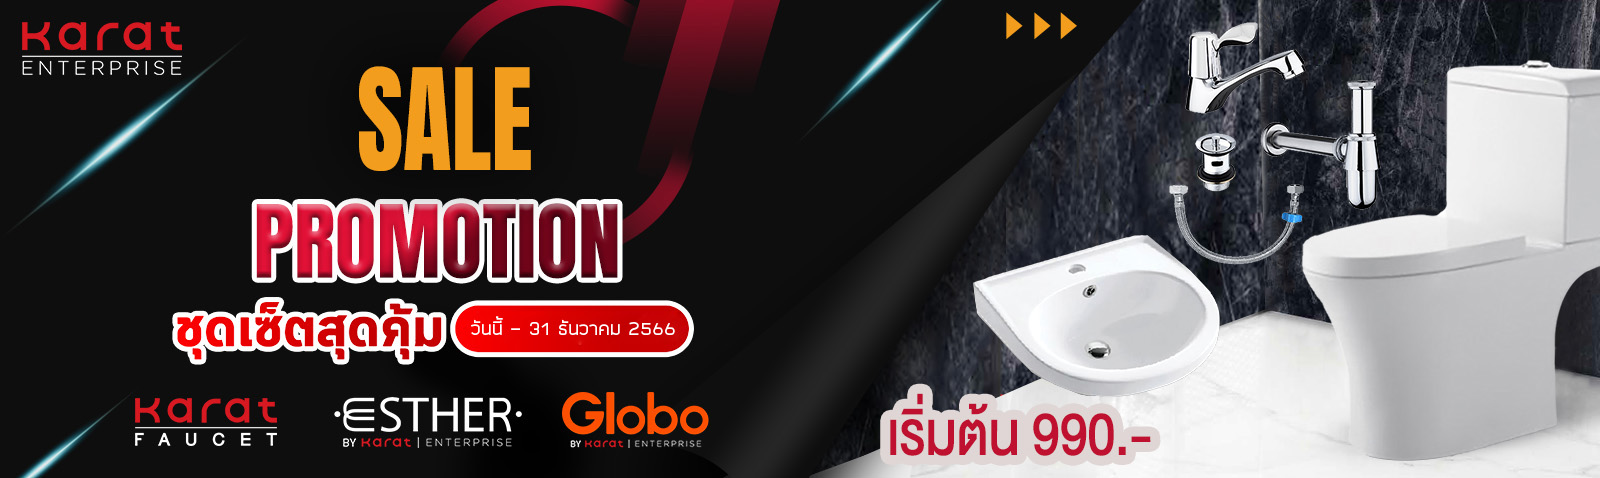 promotion banner 1600x478 px